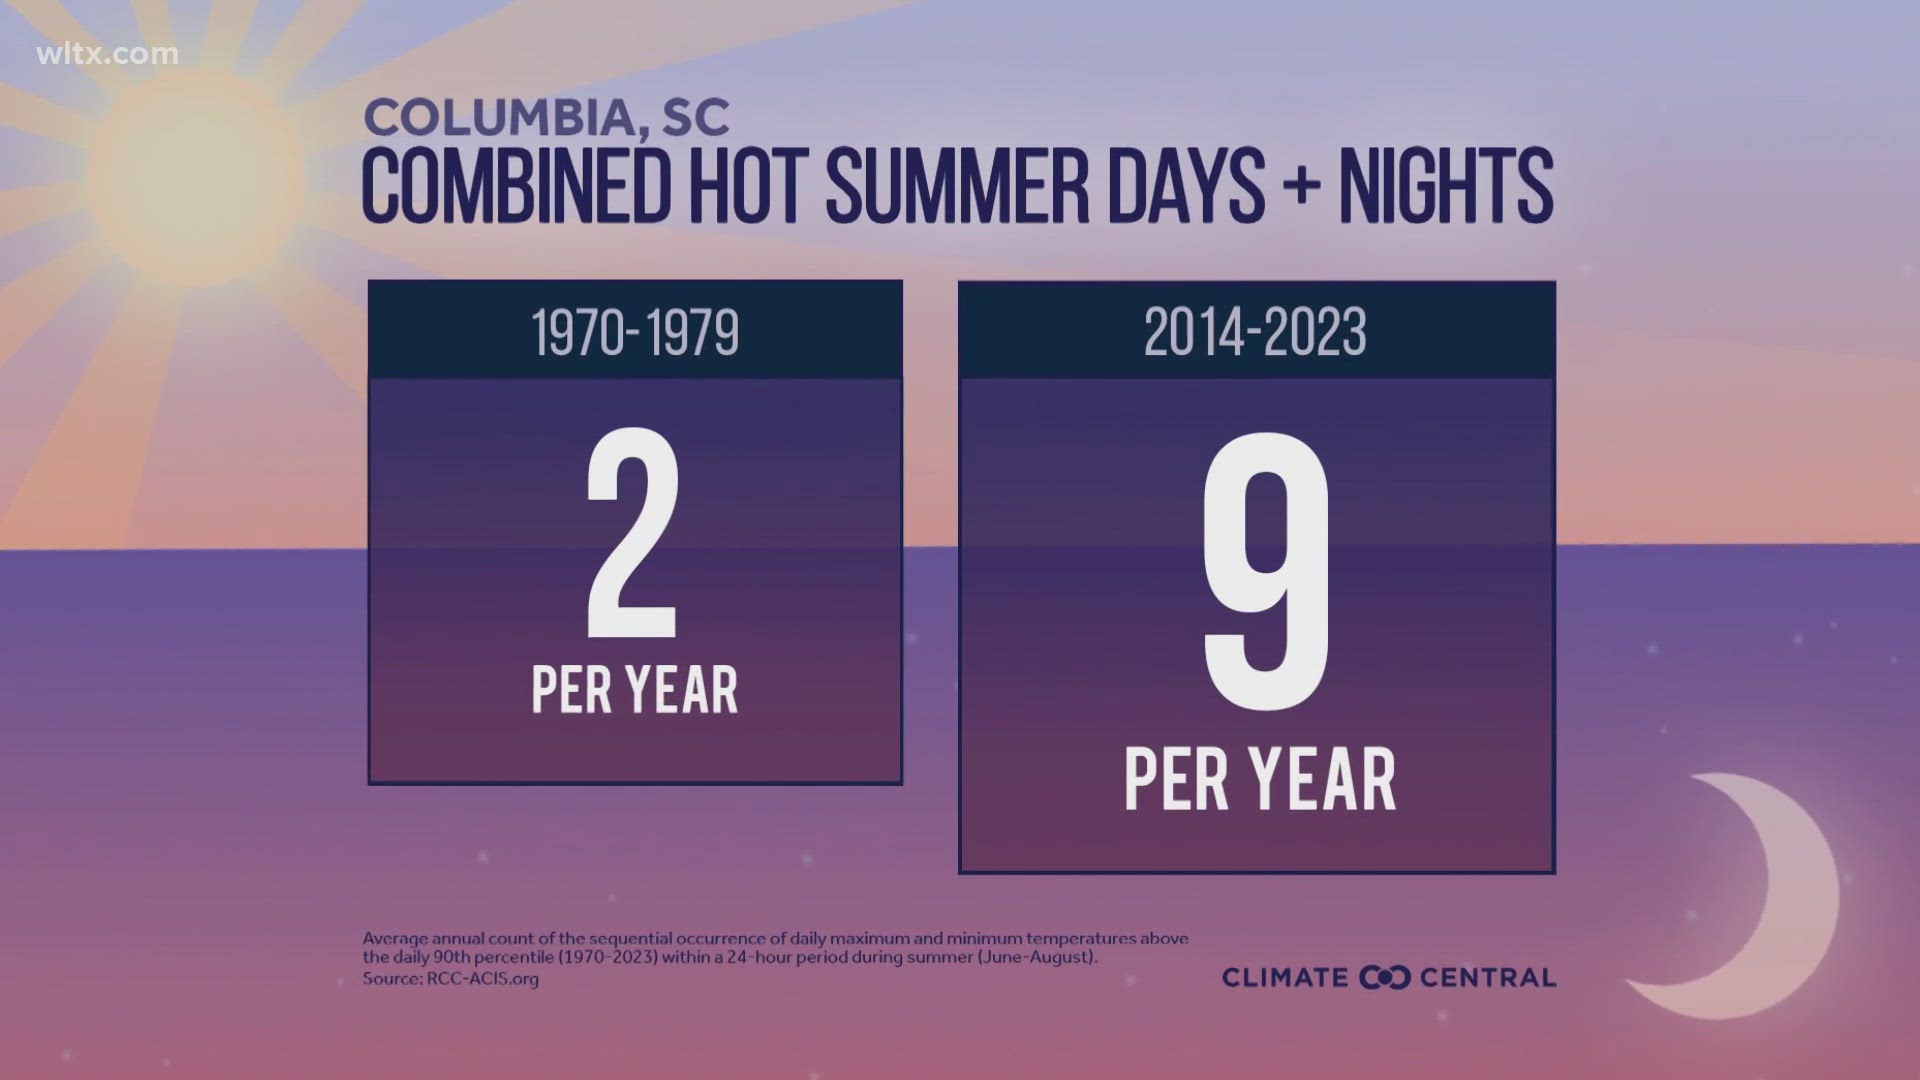 Summer has begun hot, and it’s not just the daytime temps that are a concern. Scientists are observing a dangerous combination of both hot days and hot nights.